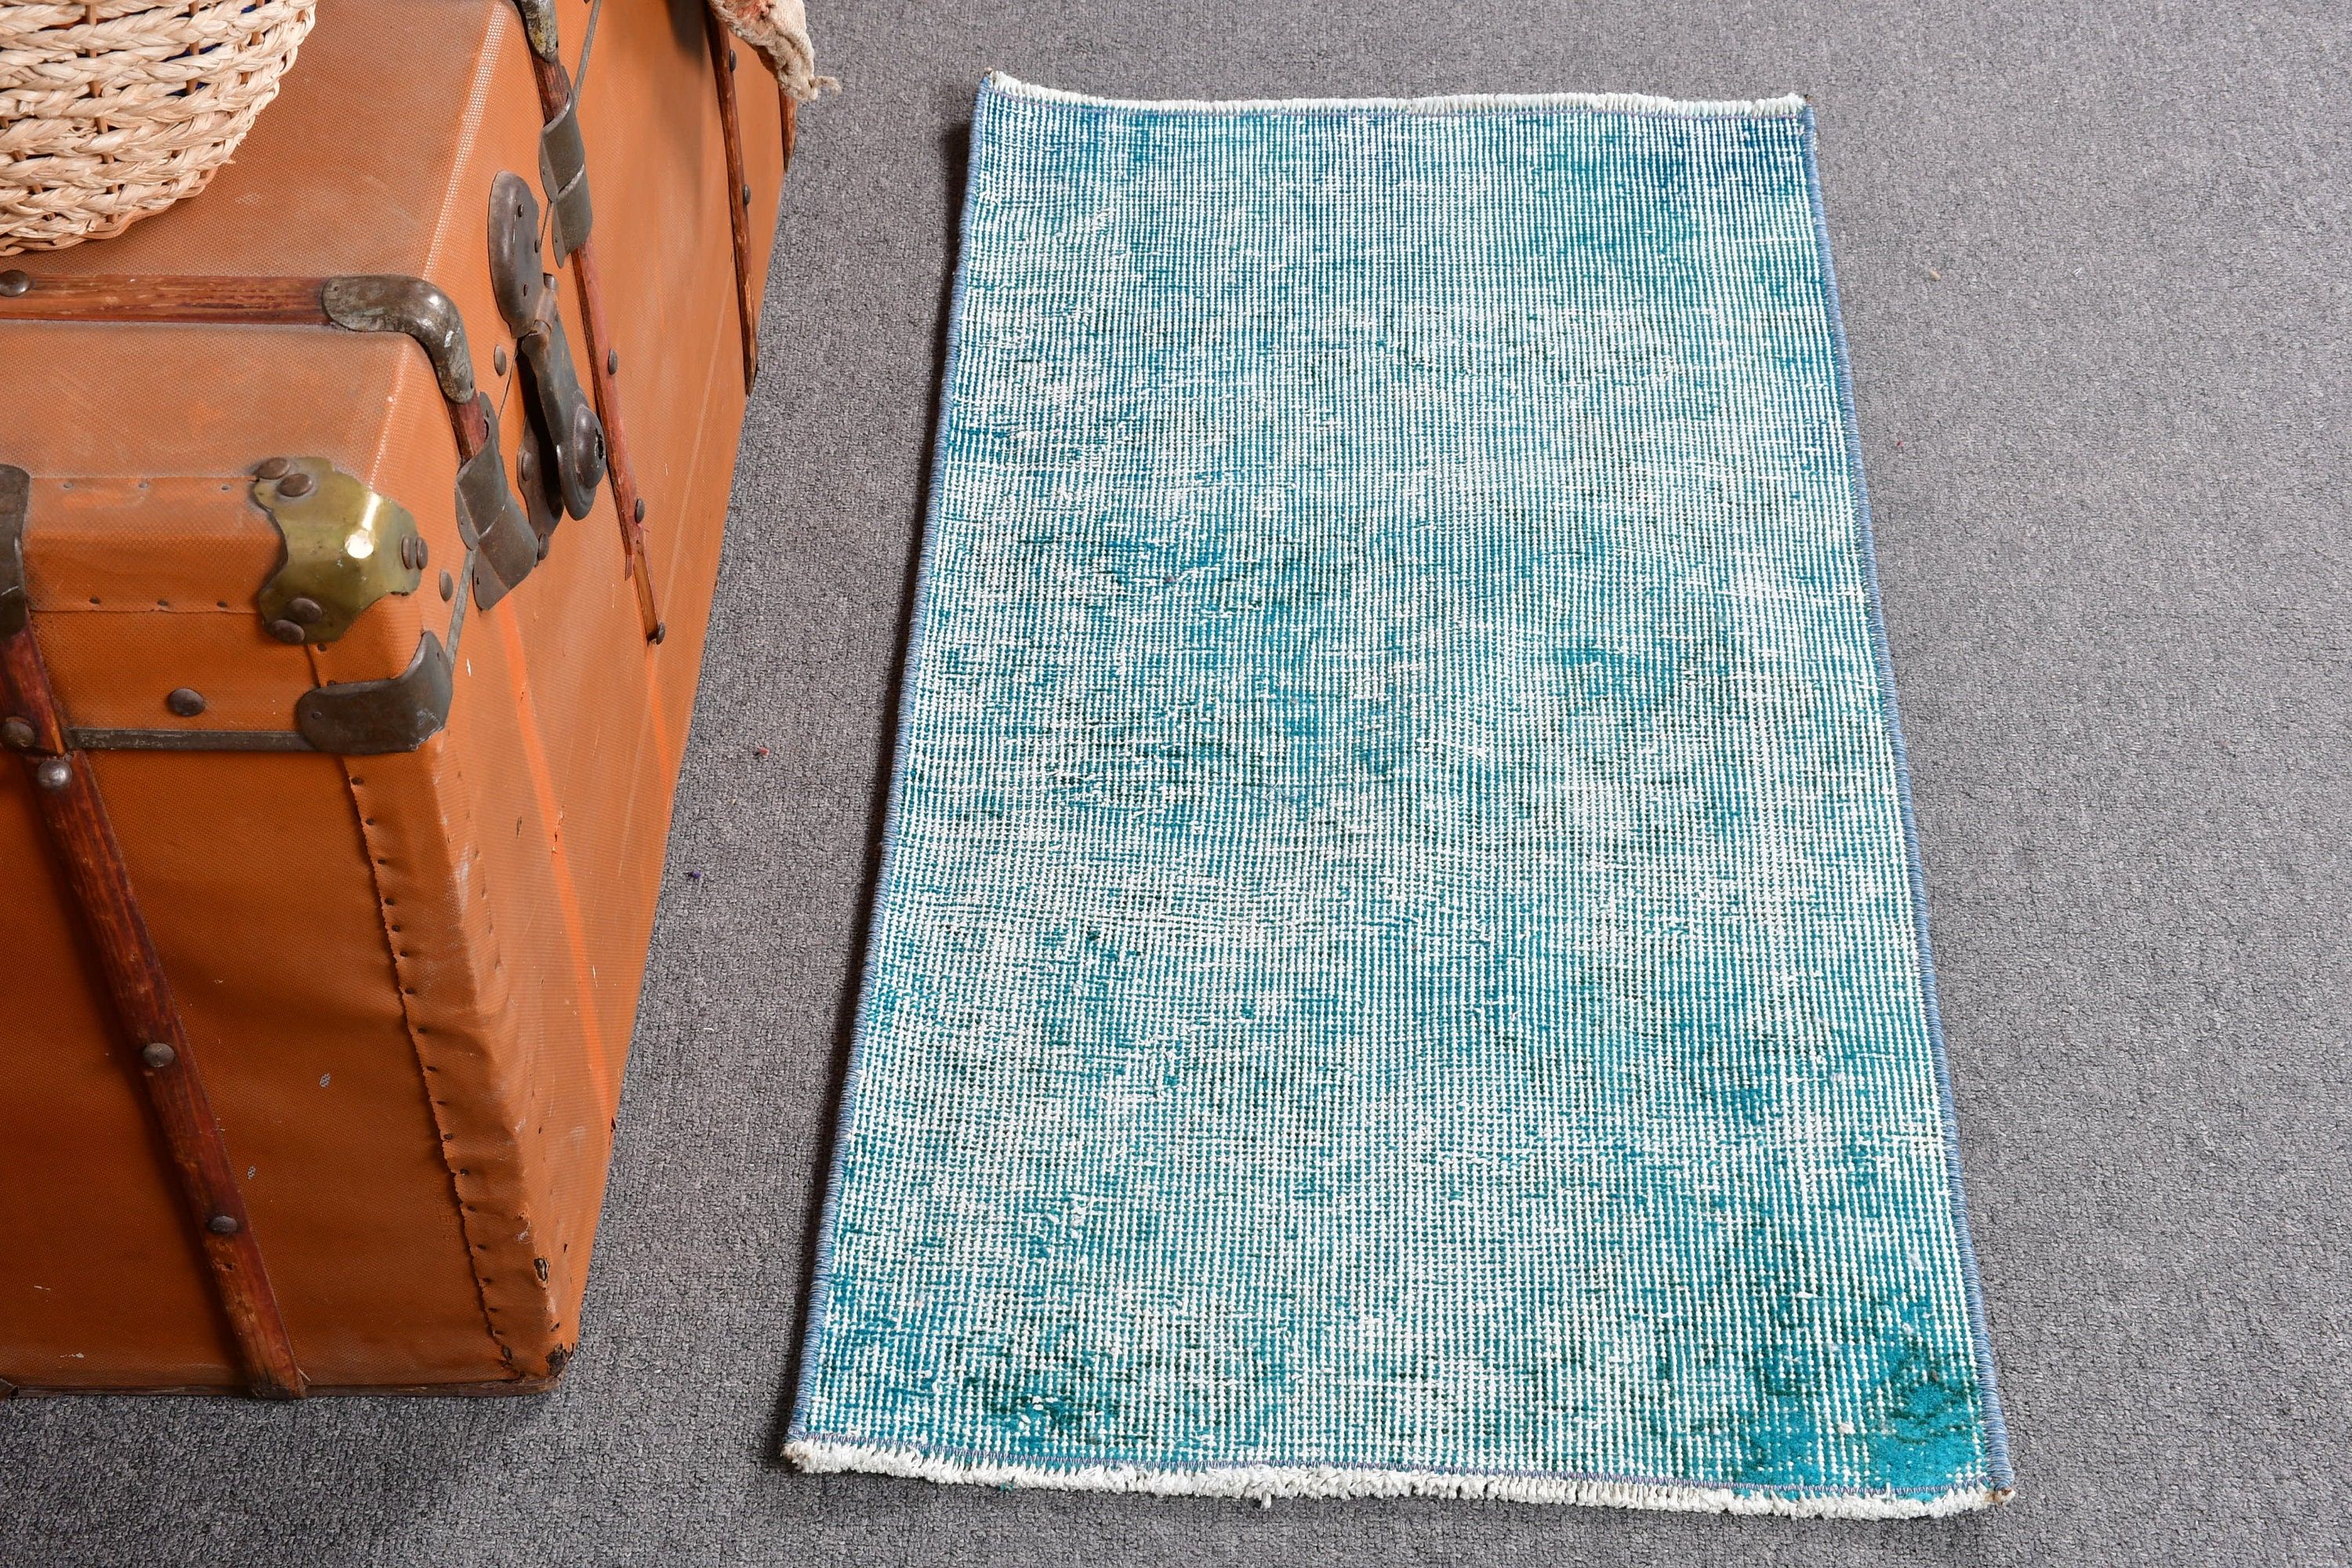 Turkish Rug, 1.6x3.1 ft Small Rug, Kitchen Rugs, Car Mat Rug, Blue Kitchen Rug, Bathroom Rug, Rugs for Entry, Vintage Rugs